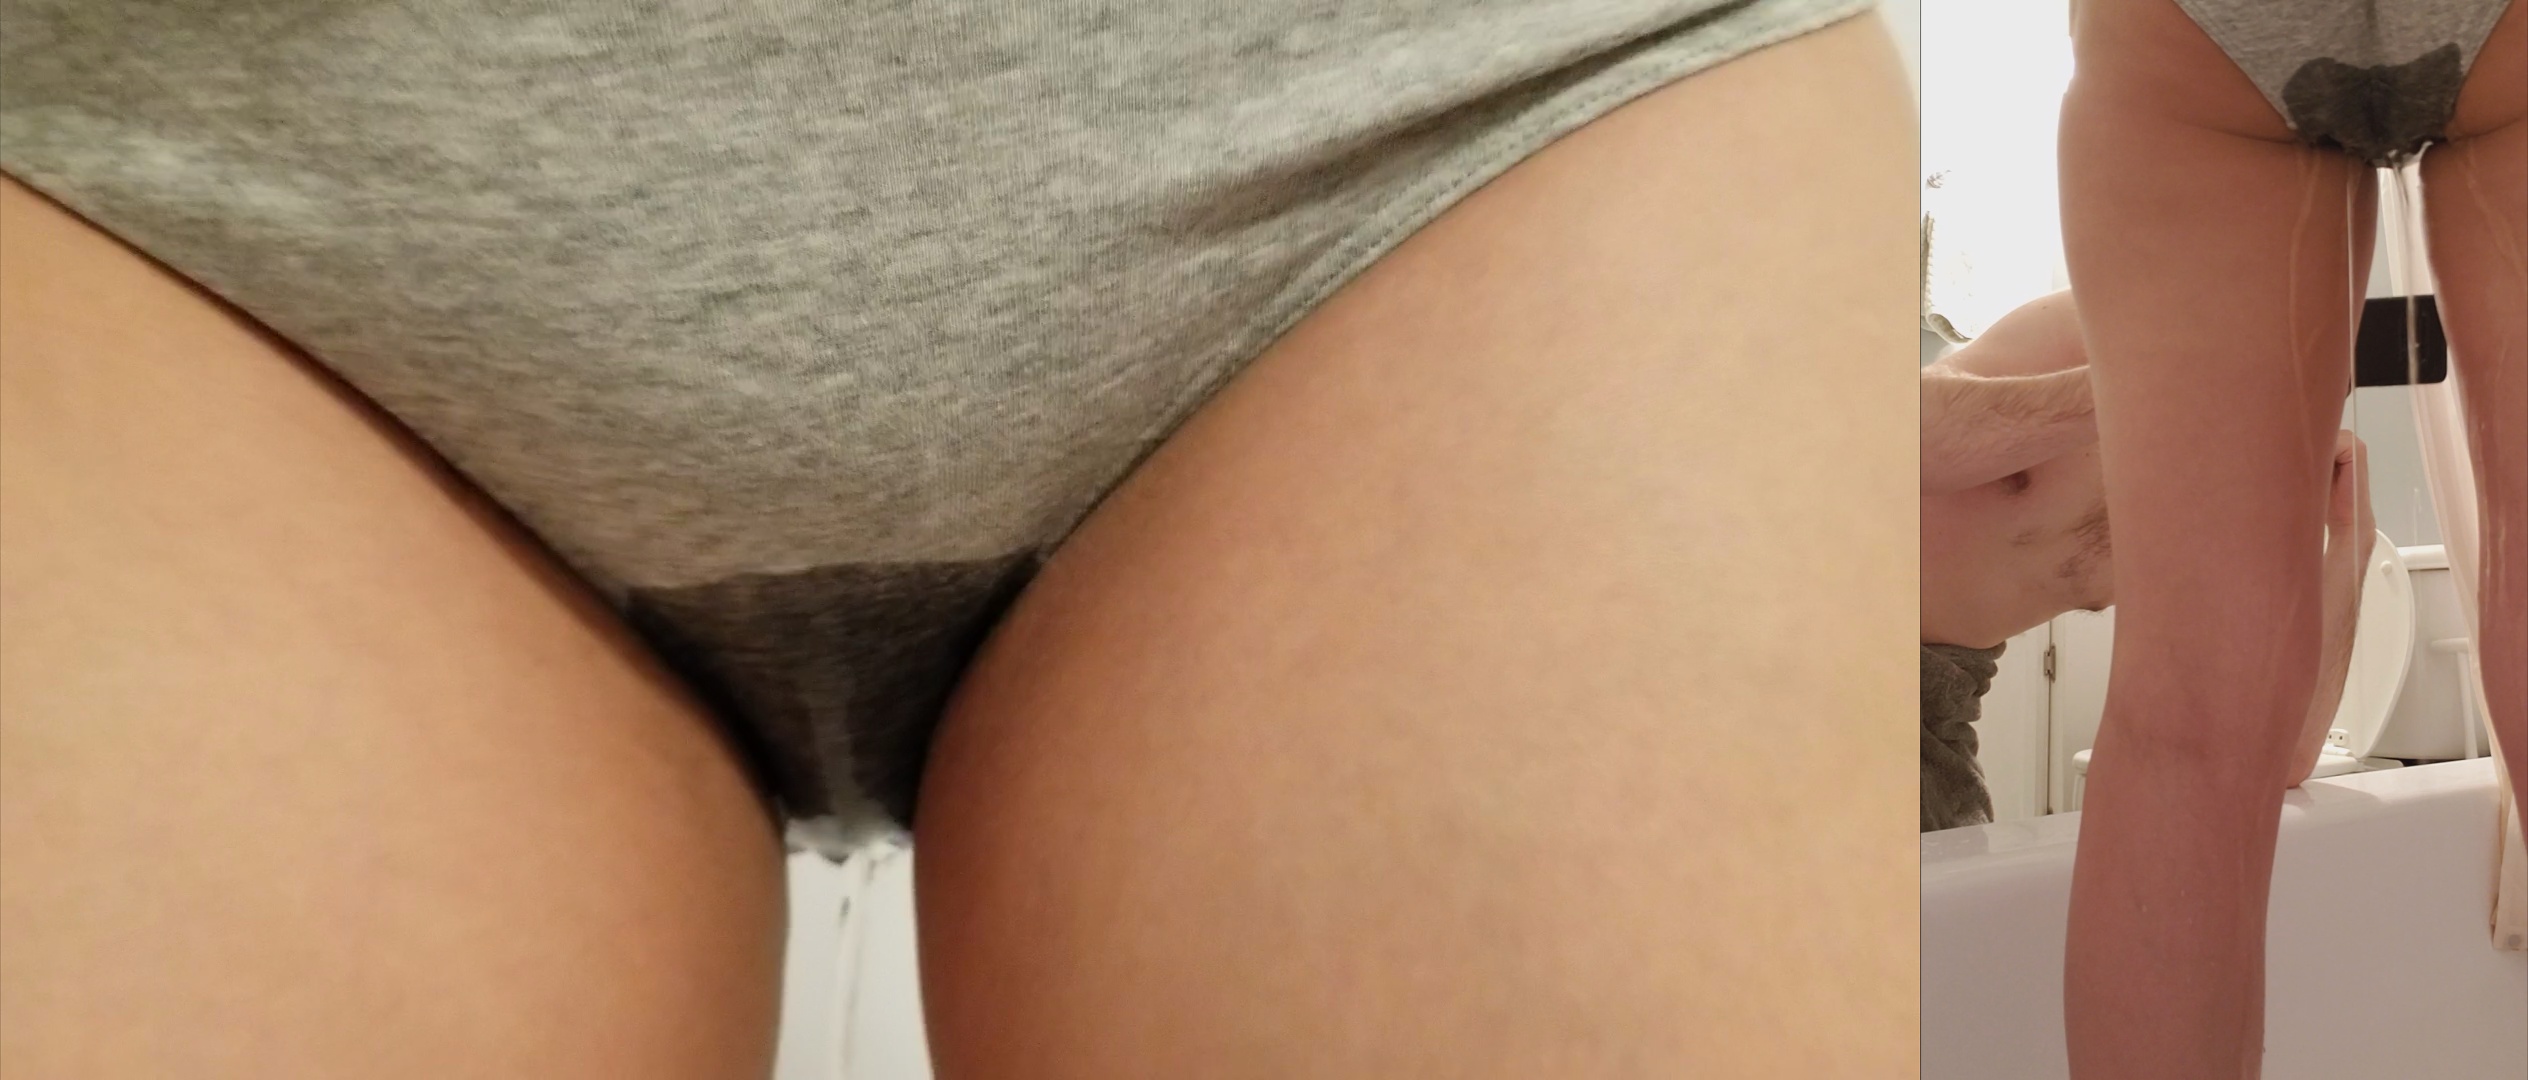 Wife held it as long as possible but ended up wetting her grey panties